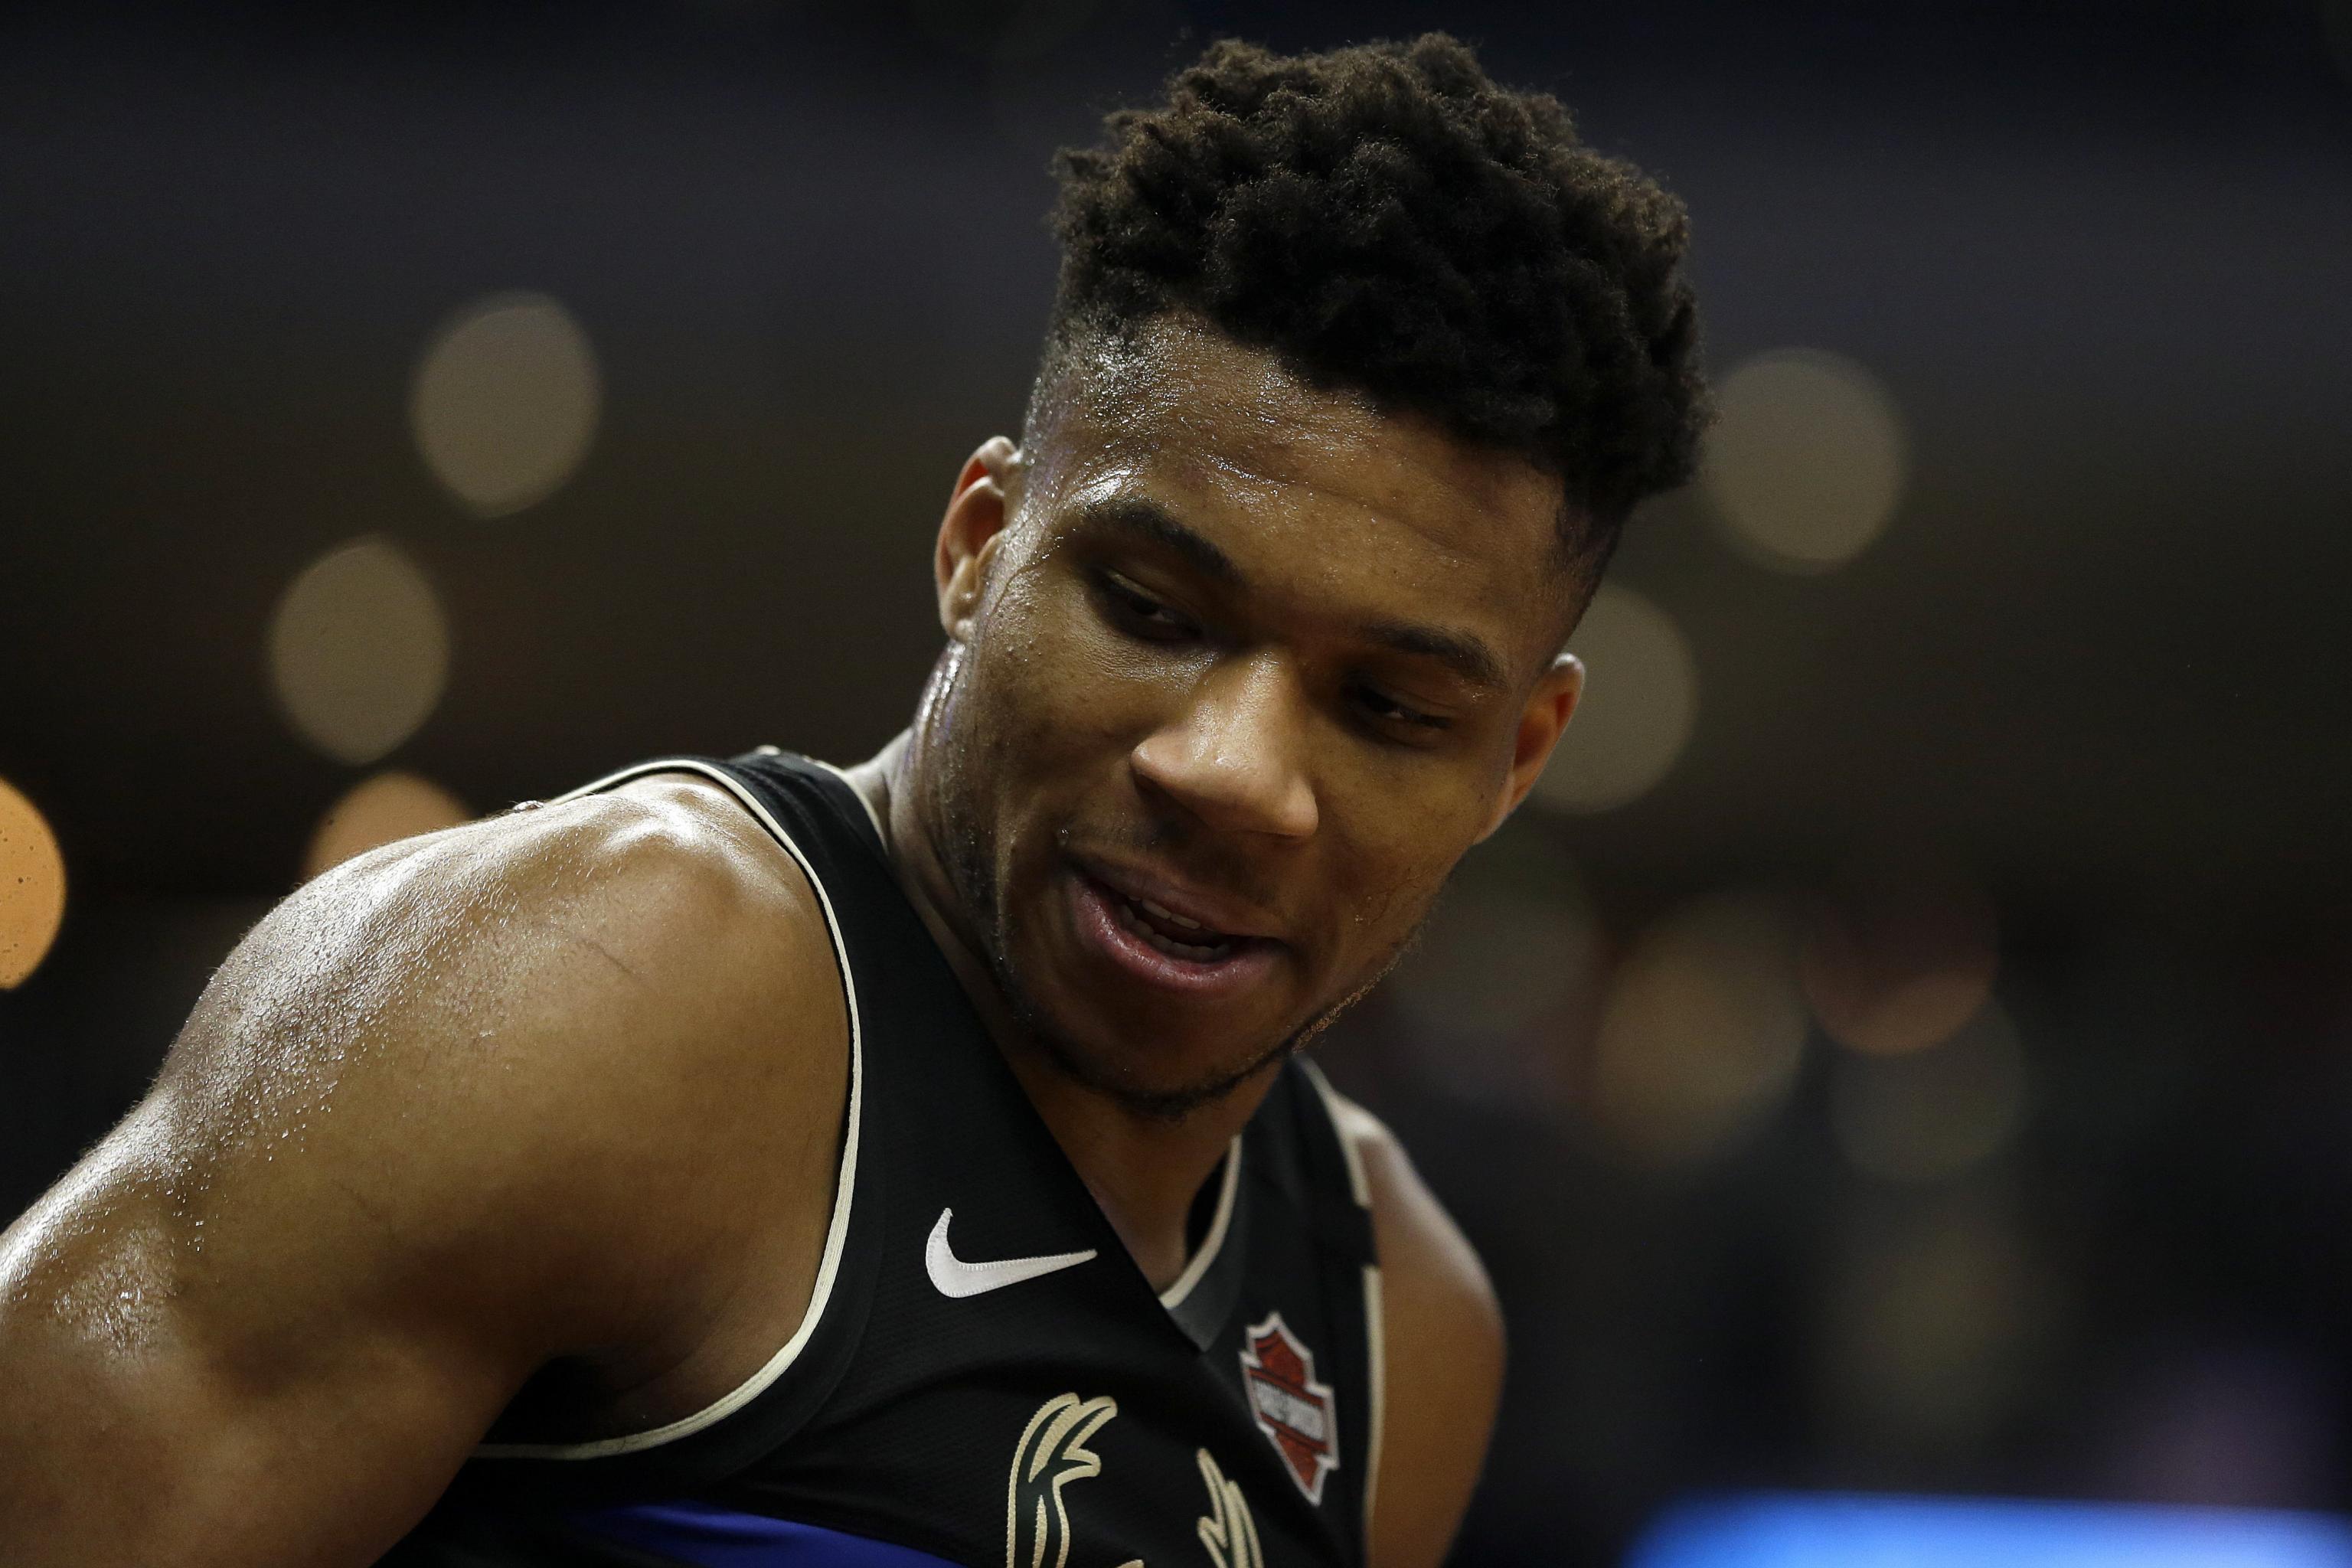 Giannis Antetokounmpo: GQ's 'Athlete of the Year's 2021 net worth